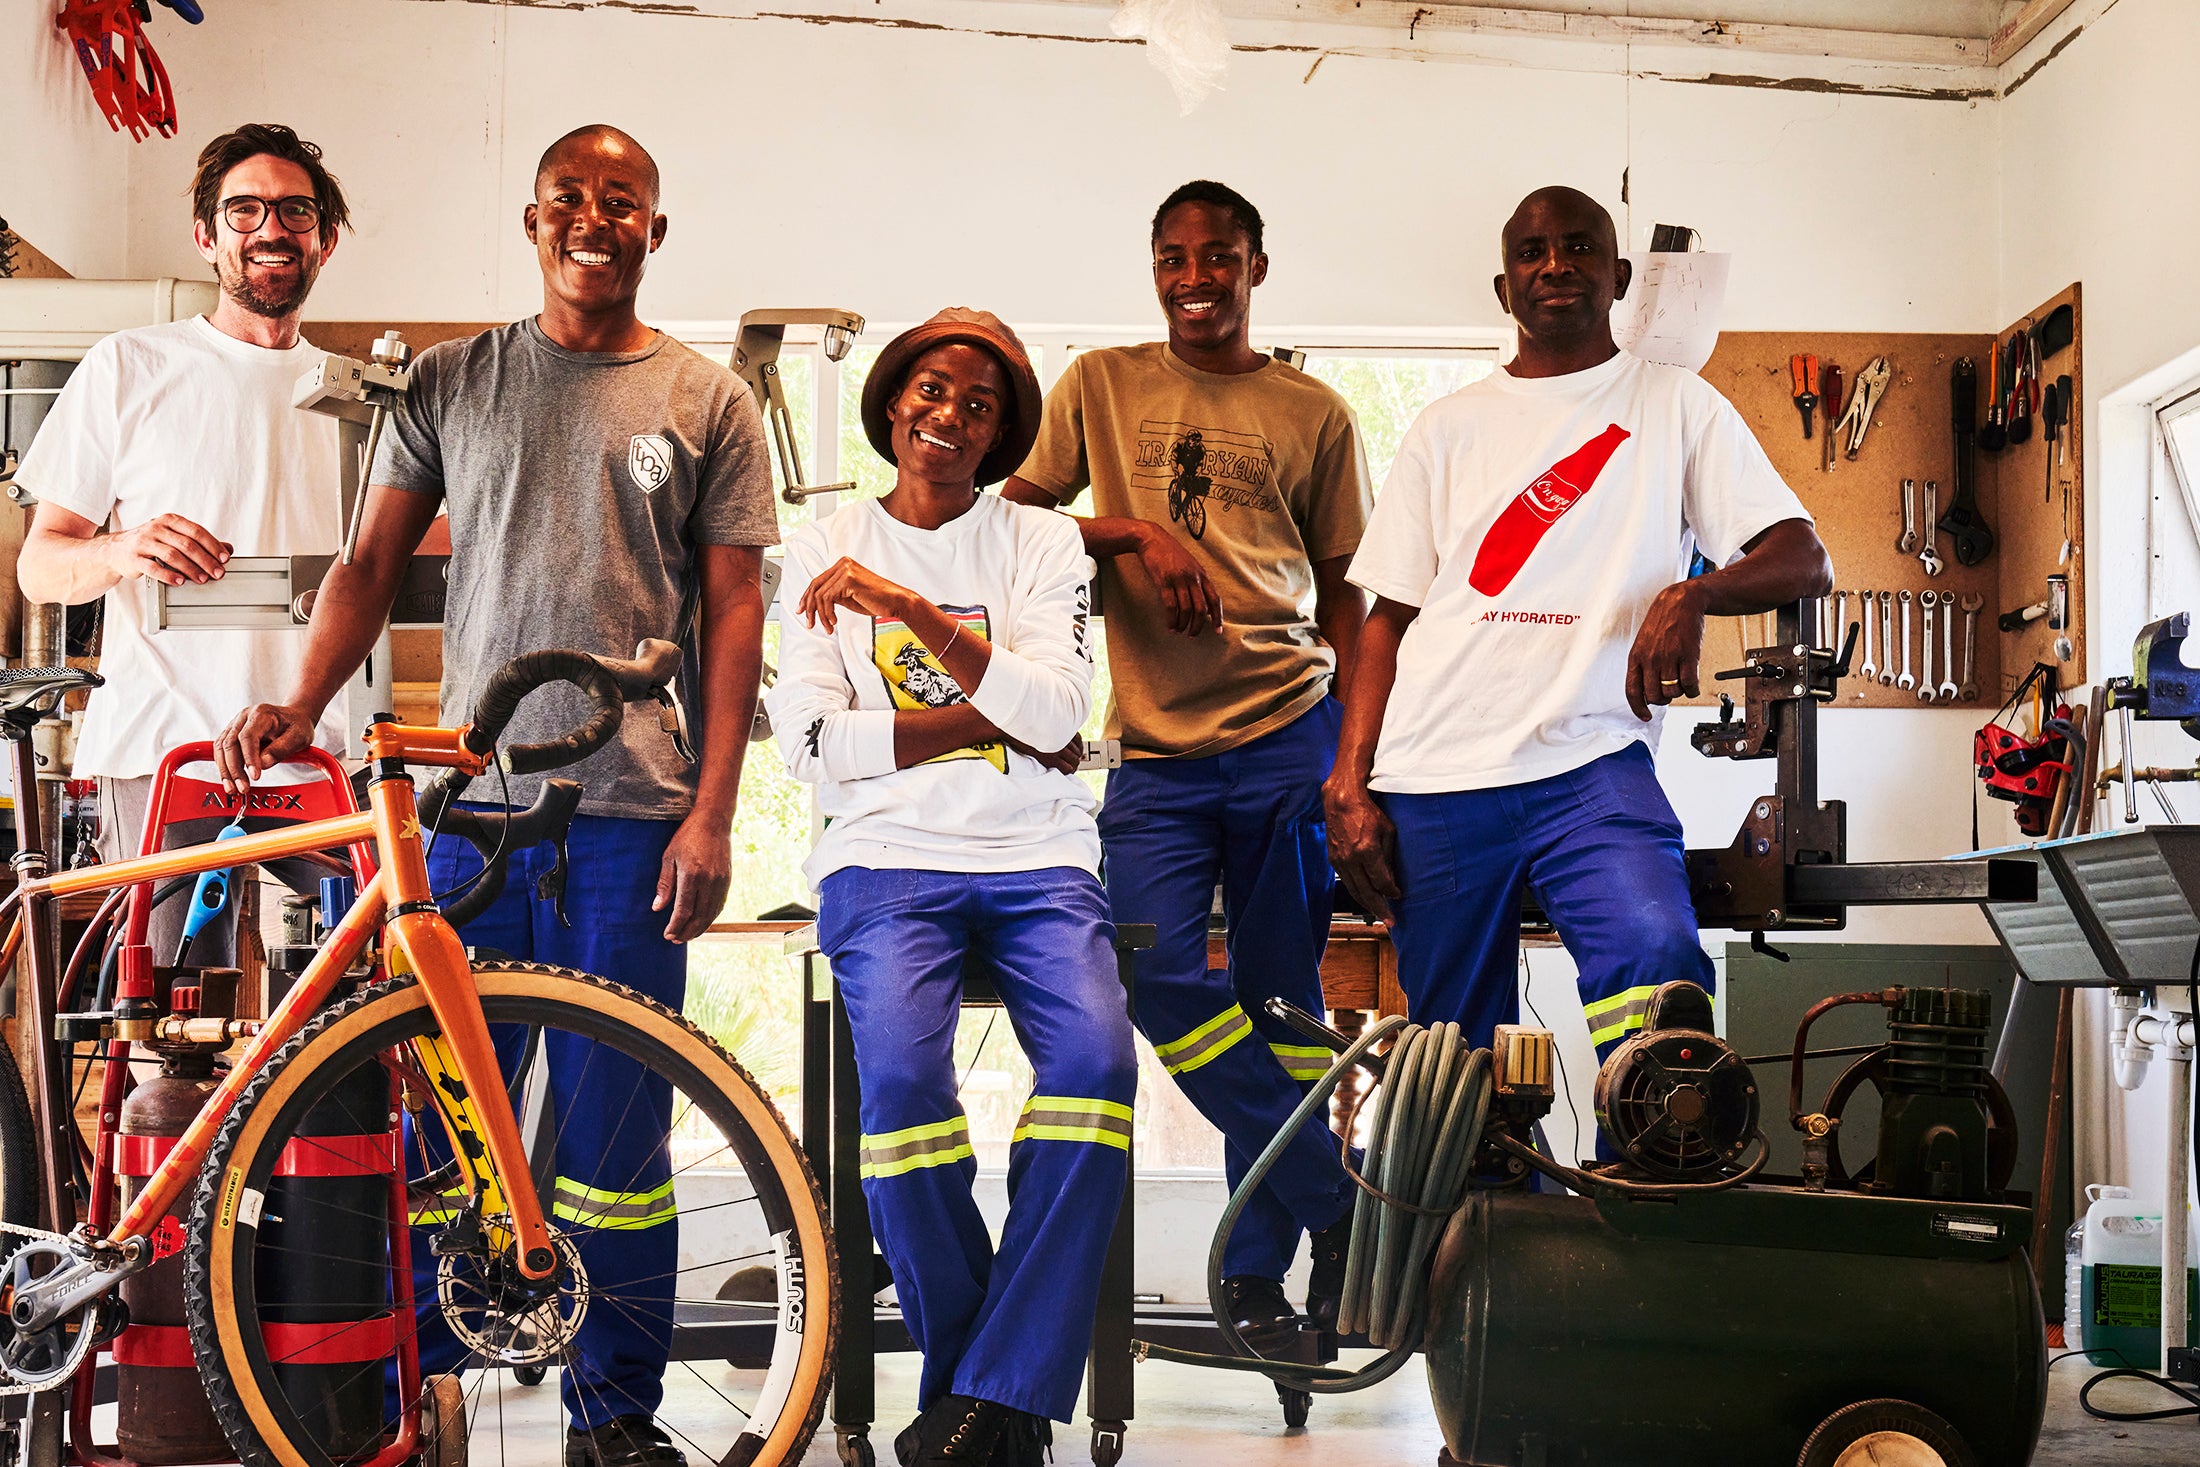 Dan Craven, Petrus Mufenge, Tilomwene Mundjele, Sakeus Mufenge and Sakaria Nkolo, the builders of ONGUZA bicycles, stand and lean against a table in the ONGUZA factory in Omaruru, Namibia. They are relaxing and smiling at the camera, evoking pride. In the foreground is an ONGUZA Gold Dune Goat Gravel bike with it's golden shade glowing in the sunlight coming in through a window to the left. They are surrounded by their builders' tools and equipment including an air compressor, brazing-welding kit and jig.